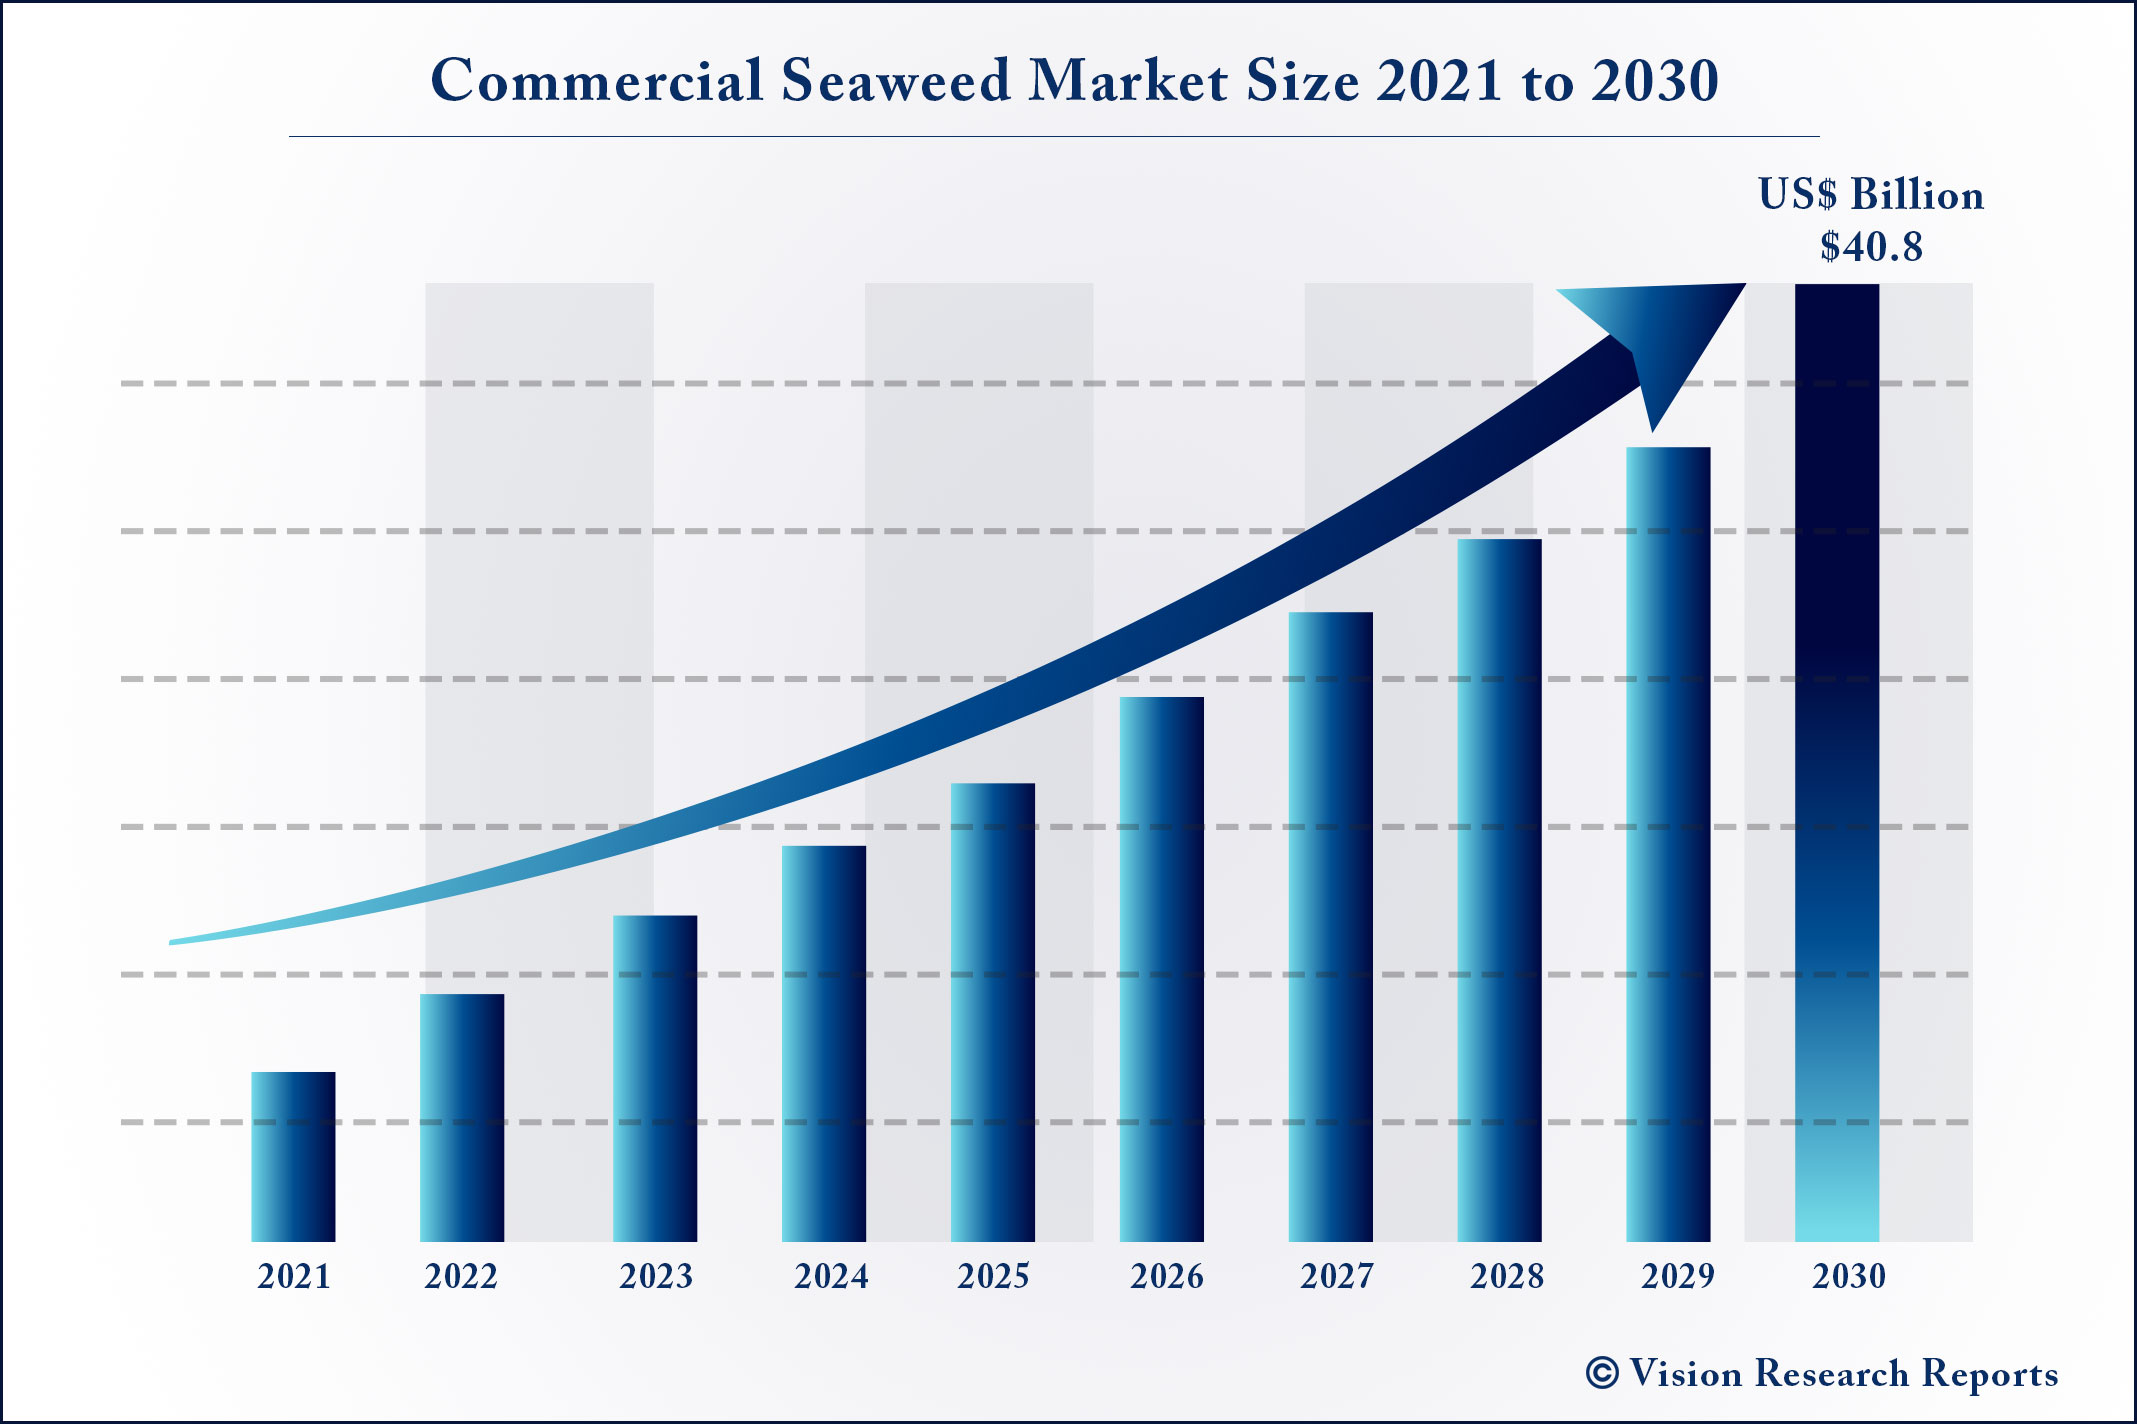 Commercial Seaweed Market Size 2021 to 2030